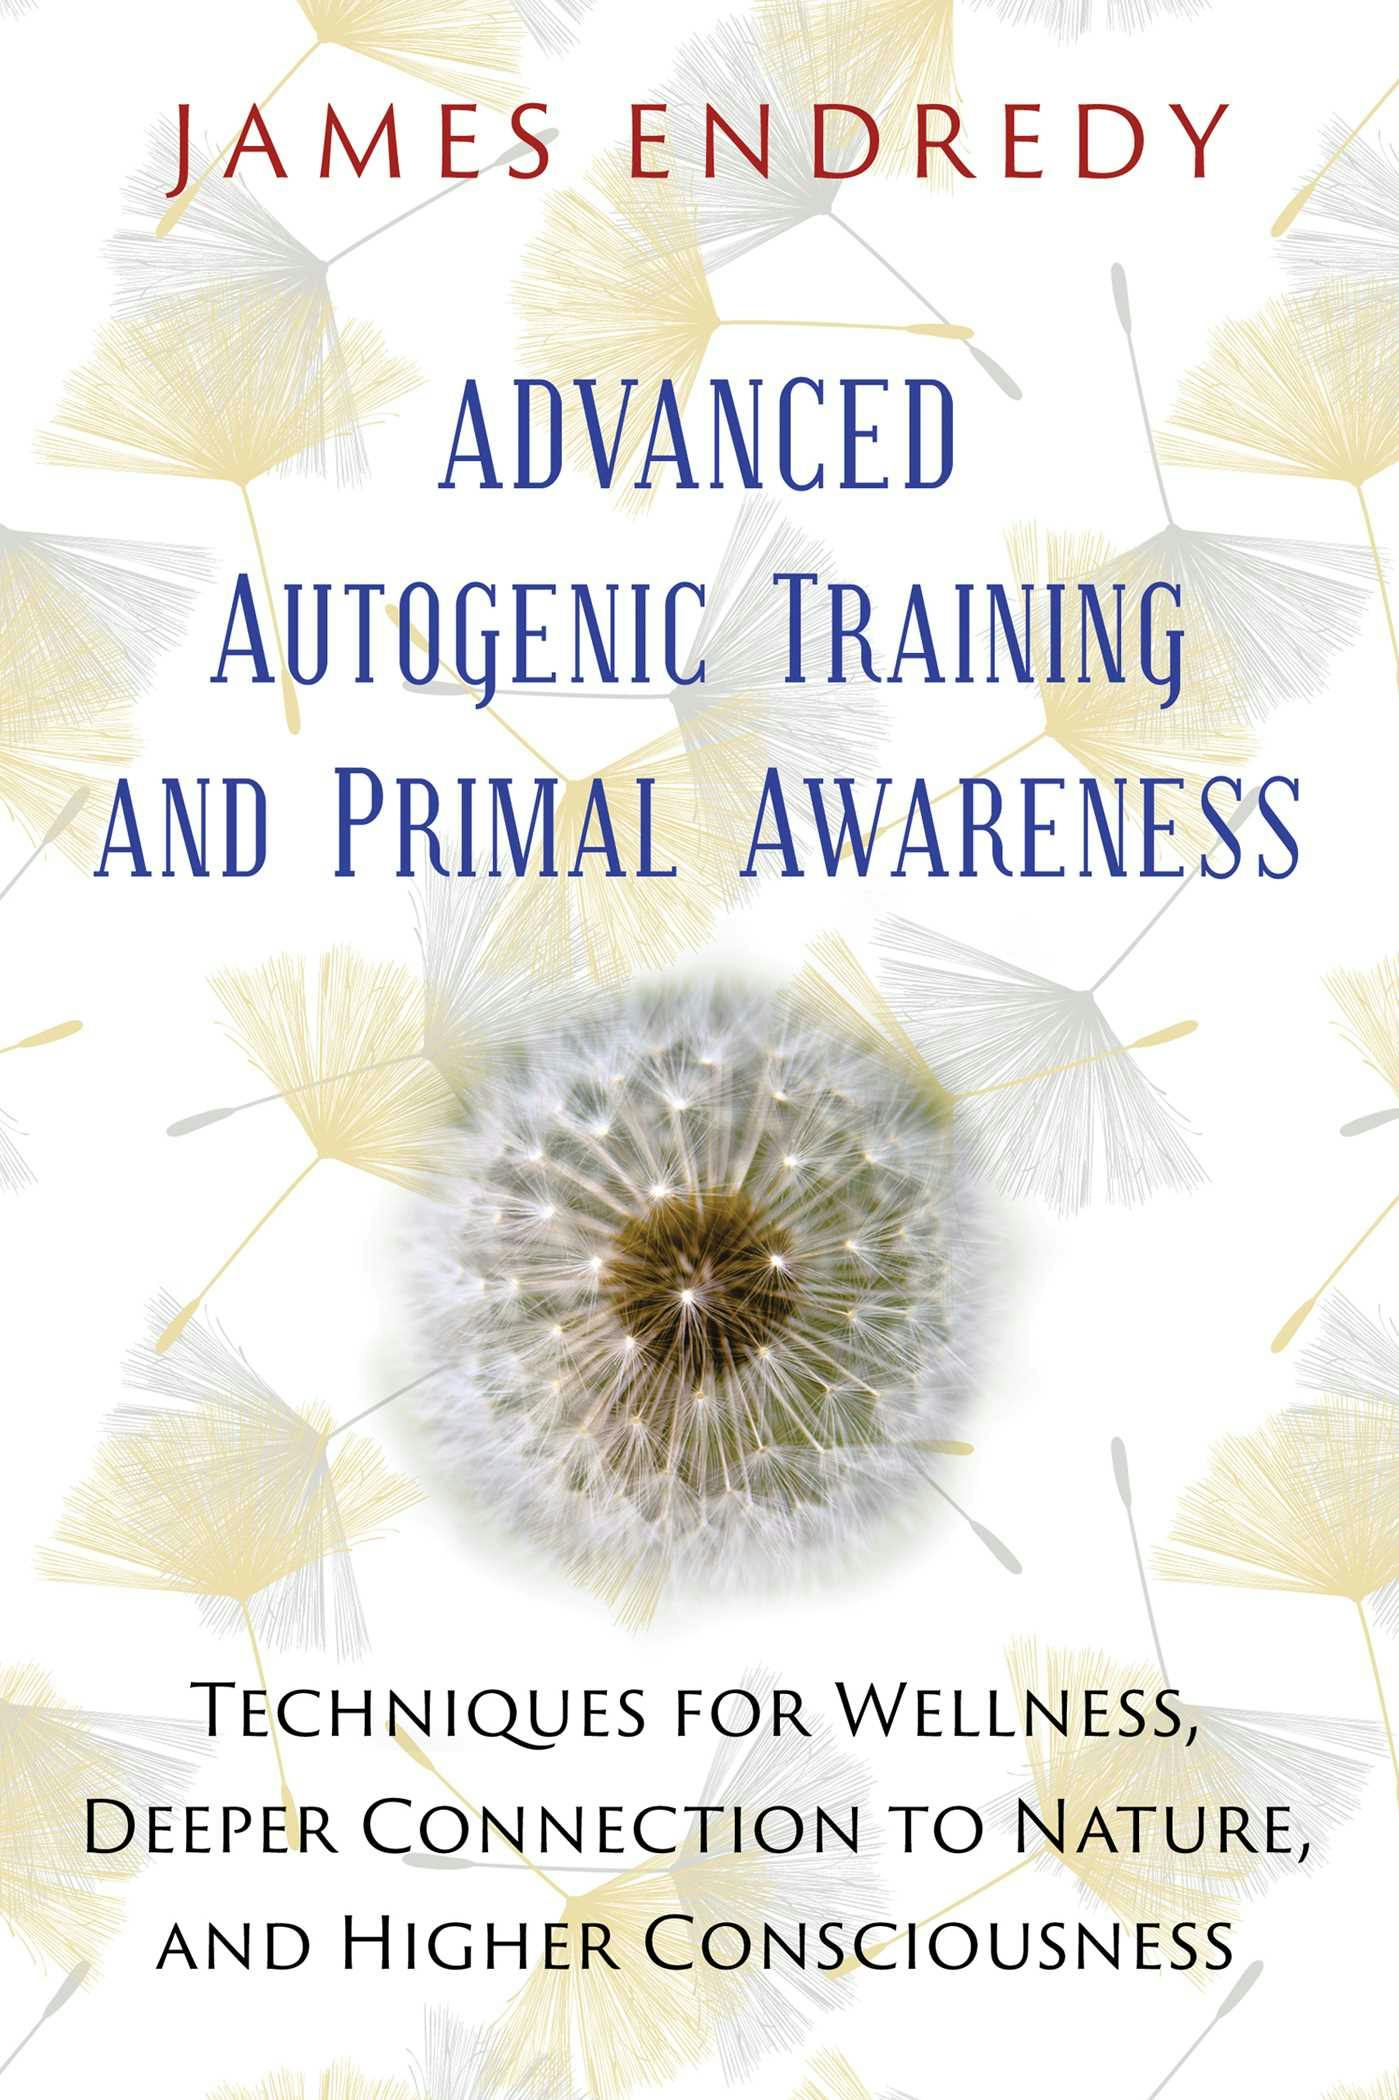 Advanced Autogenic Training and Primal Awareness: Techniques for Wellness, Deeper Connection to Nature, and Higher Consciousness - James Endredy